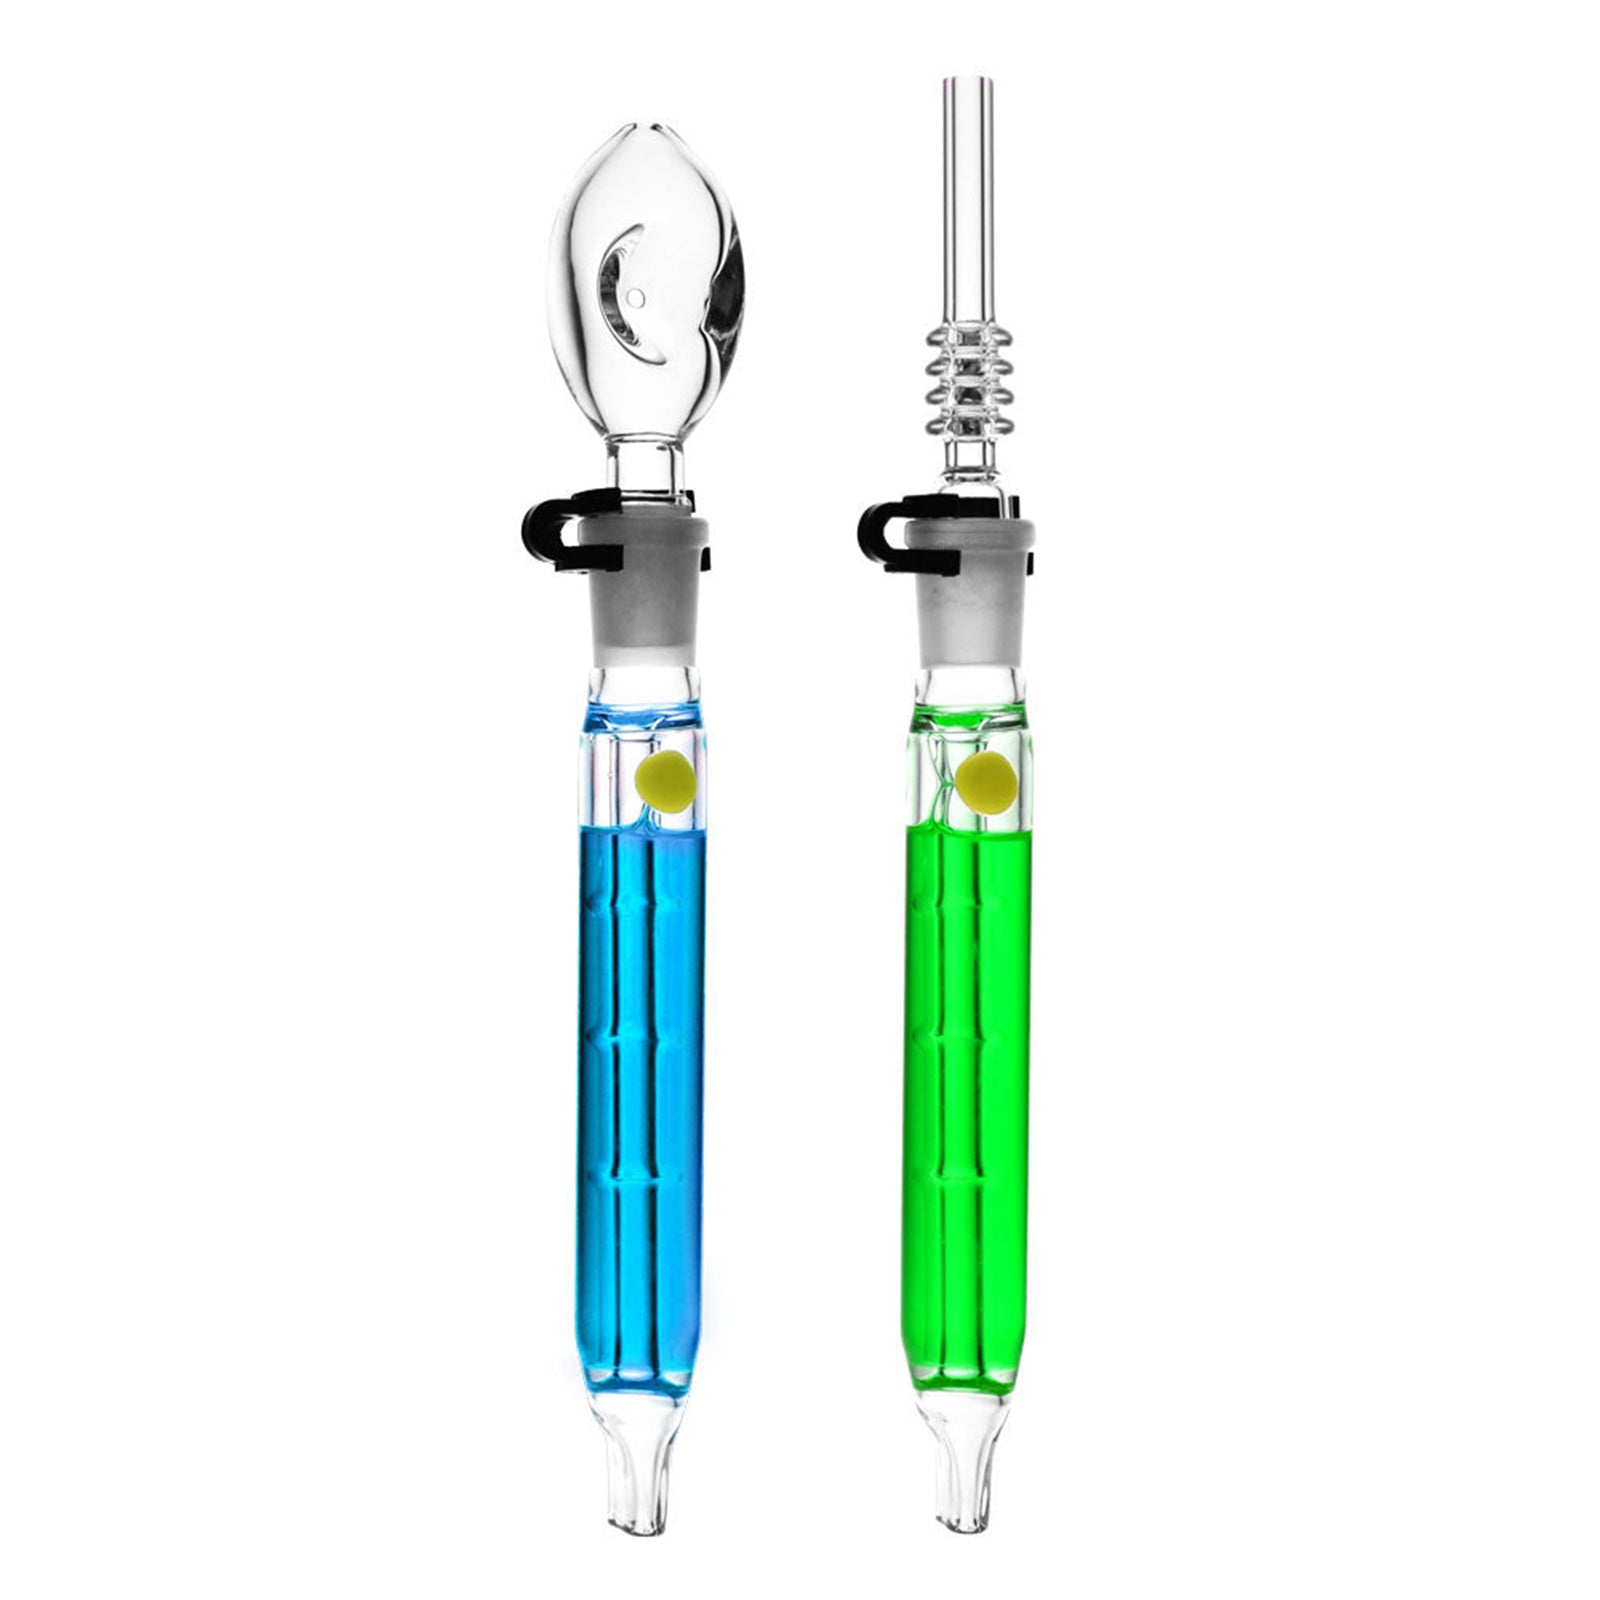 Freezable Glycerin Nectar Collector & Spoon Pipe